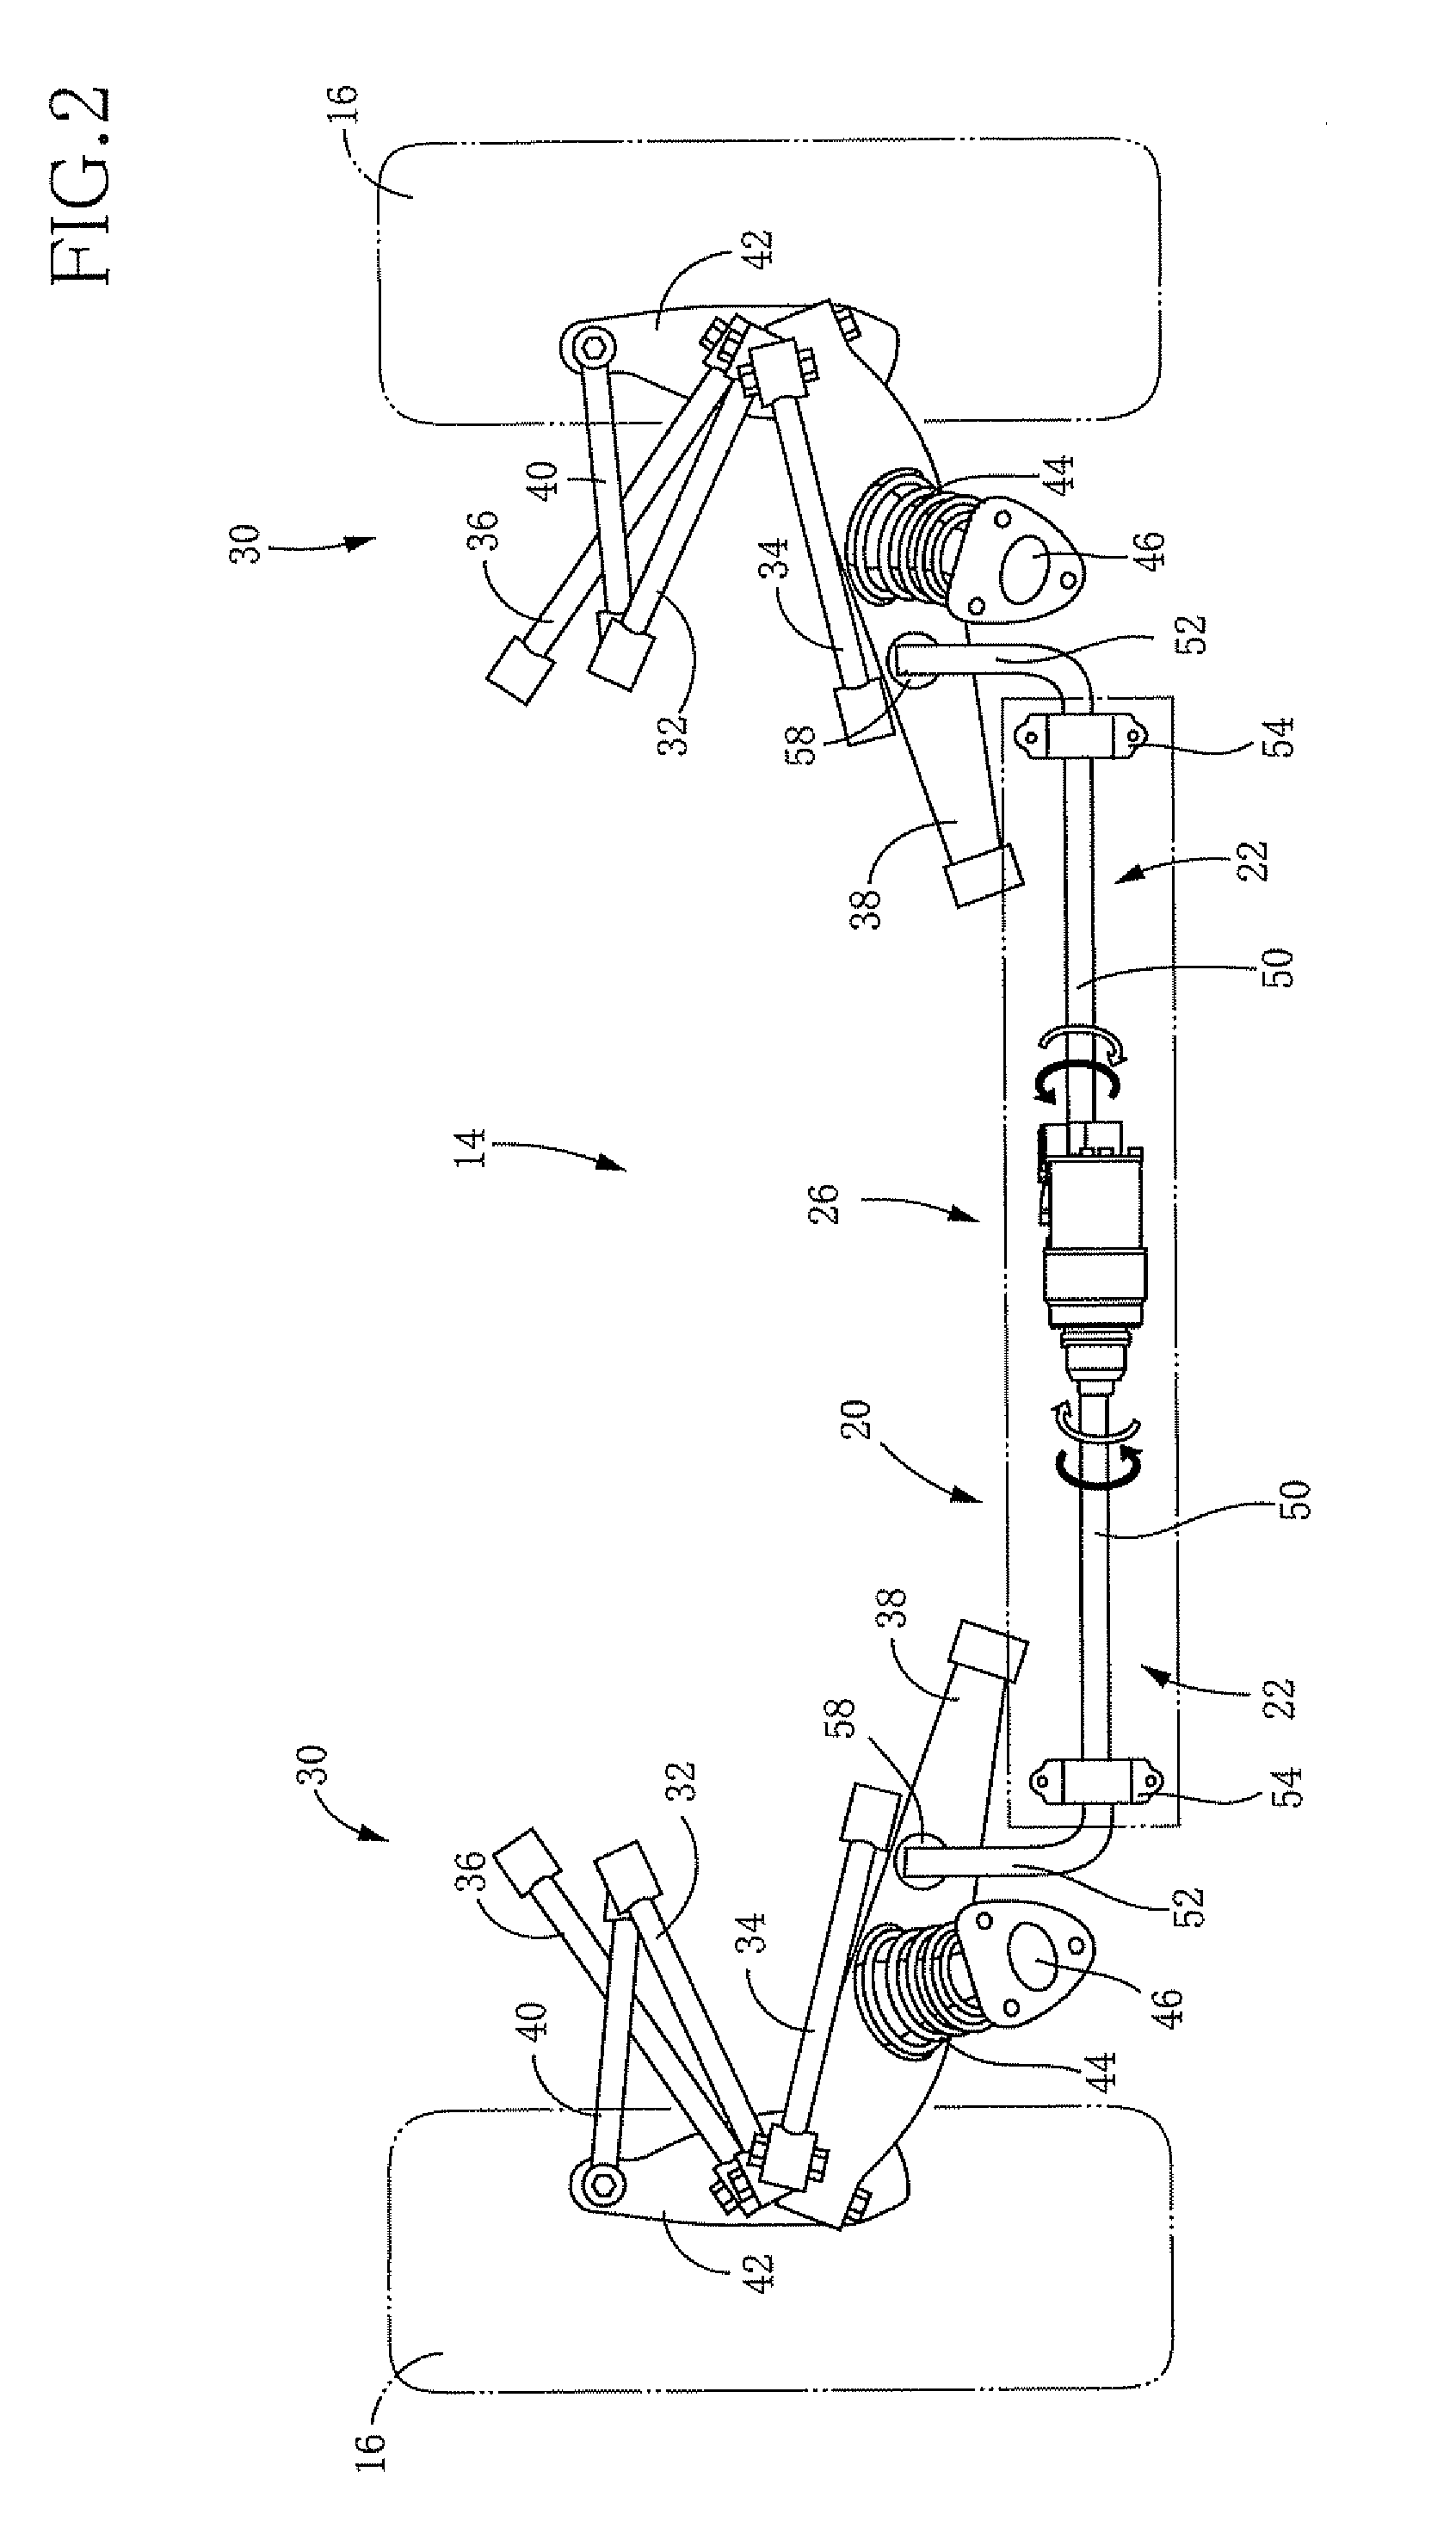 Body-roll restraining system for vehicle